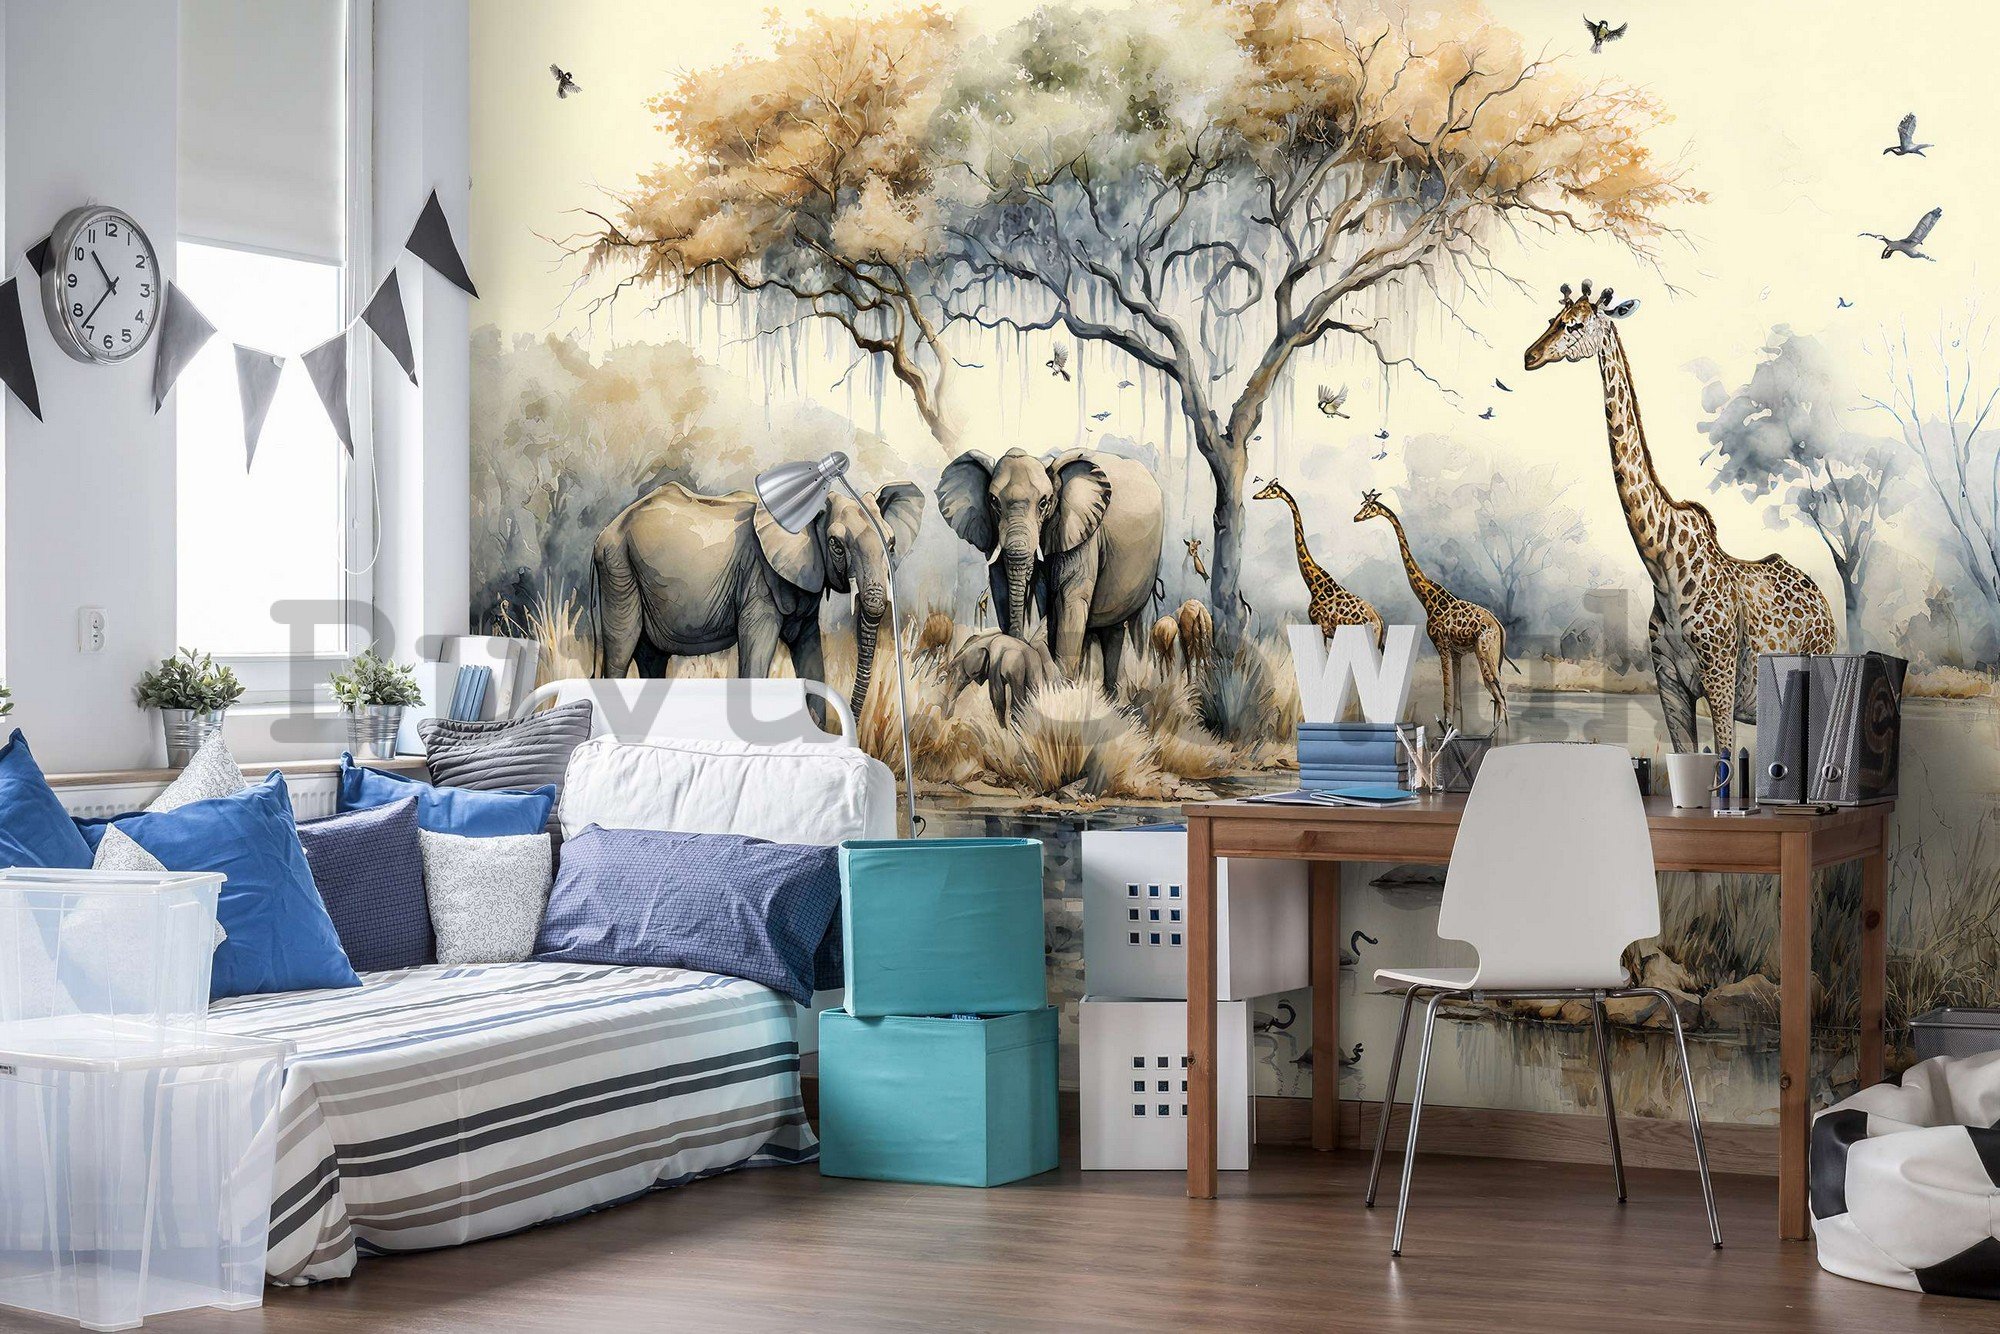 Wall mural vlies: Wild animals at the watering hole - 152,5x104 cm